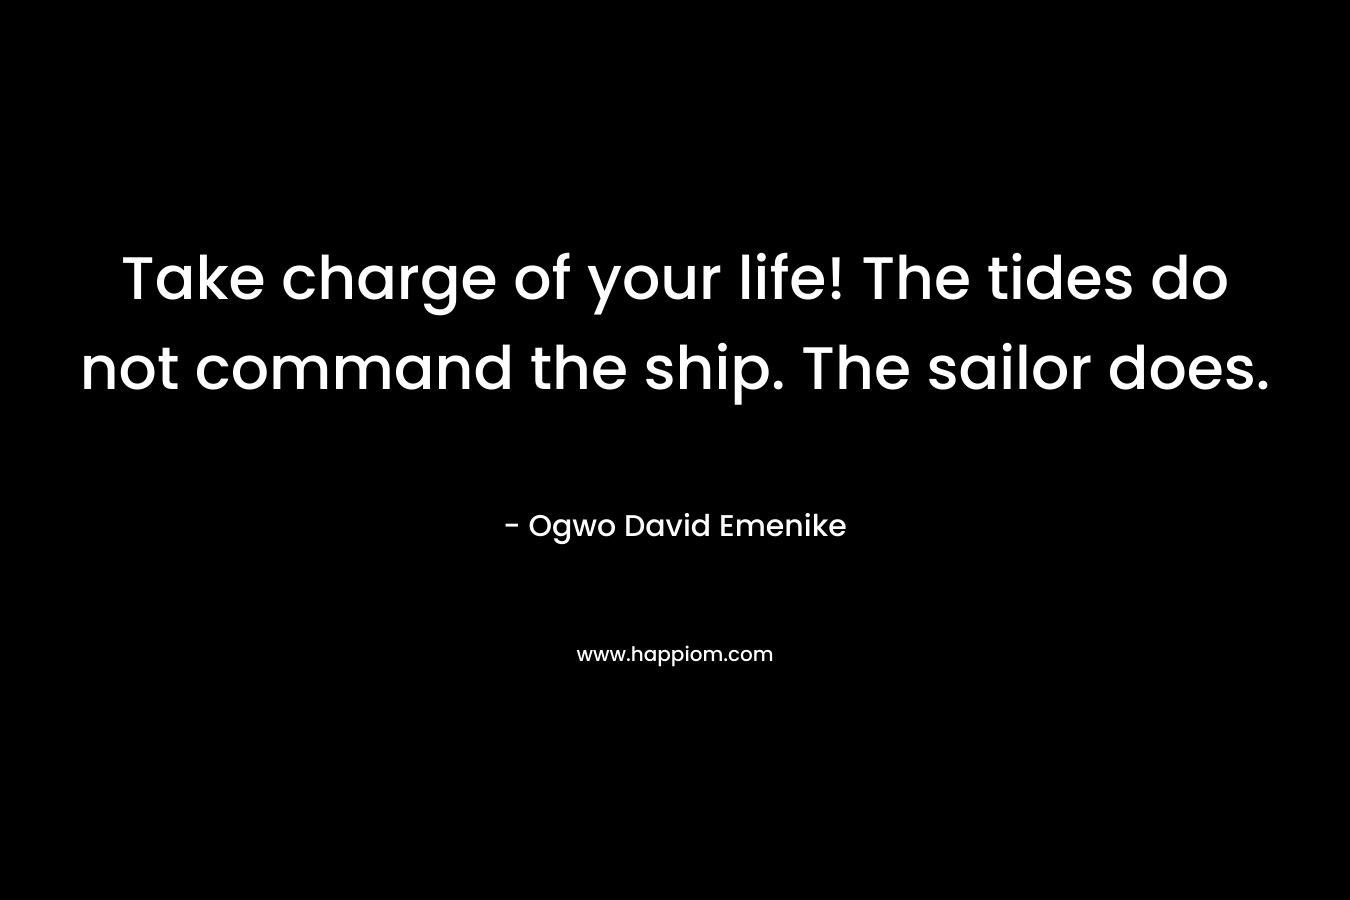 Take charge of your life! The tides do not command the ship. The sailor does. – Ogwo David Emenike